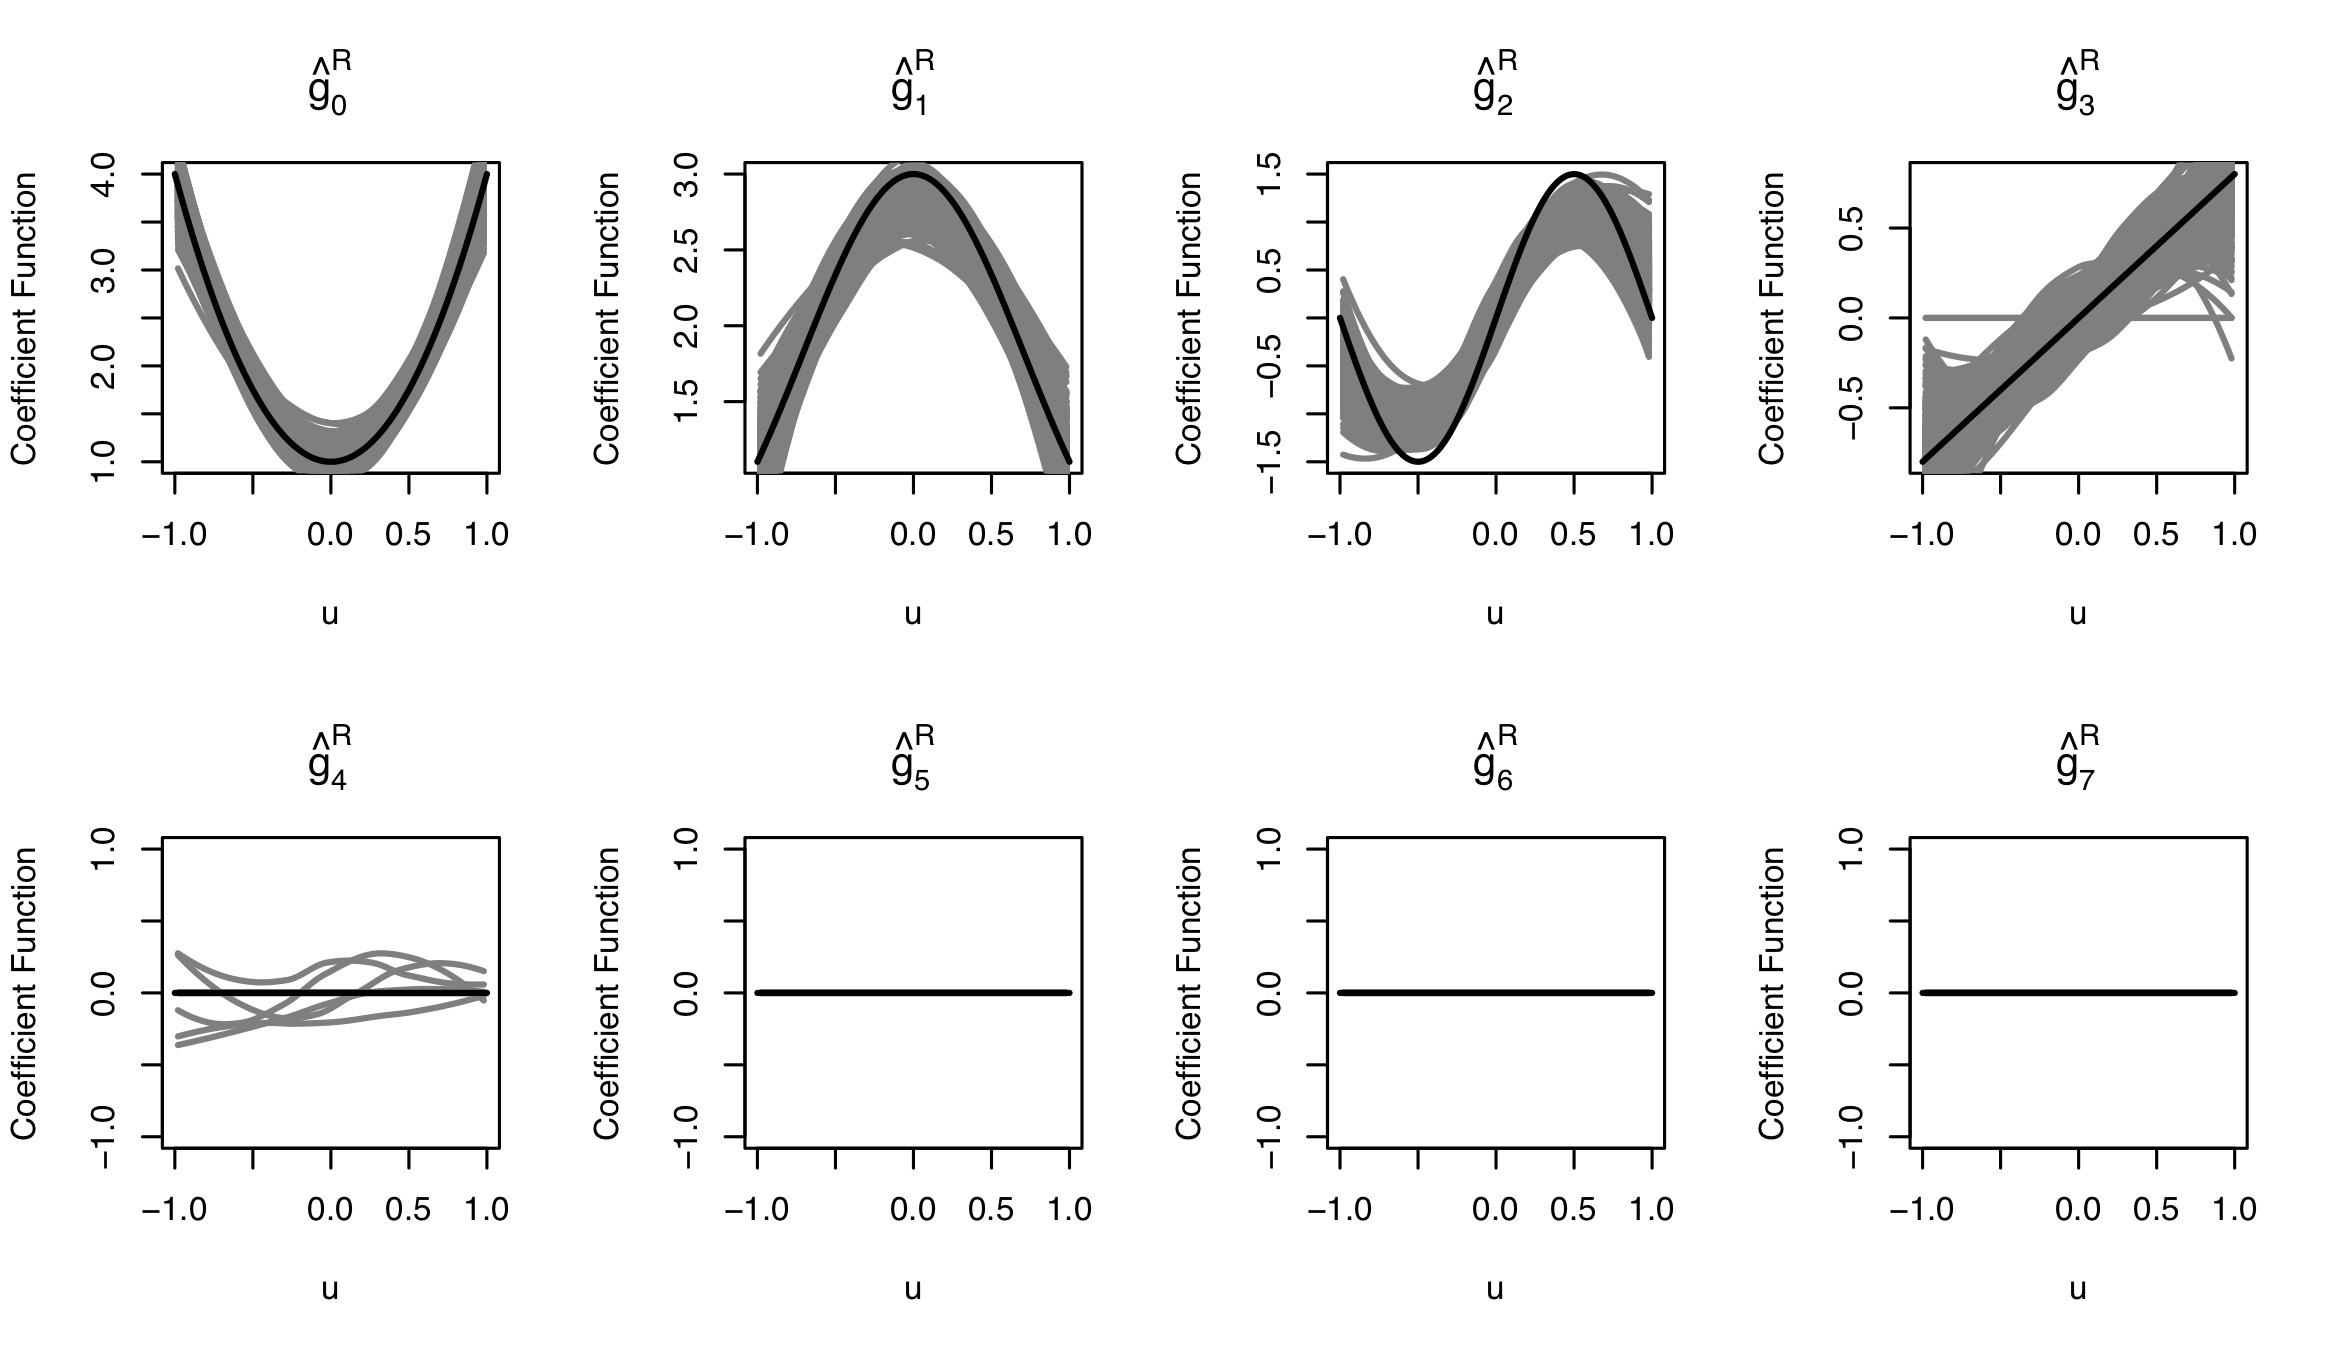 Plots of coefficient functions of a single-index varying coefficients regression model